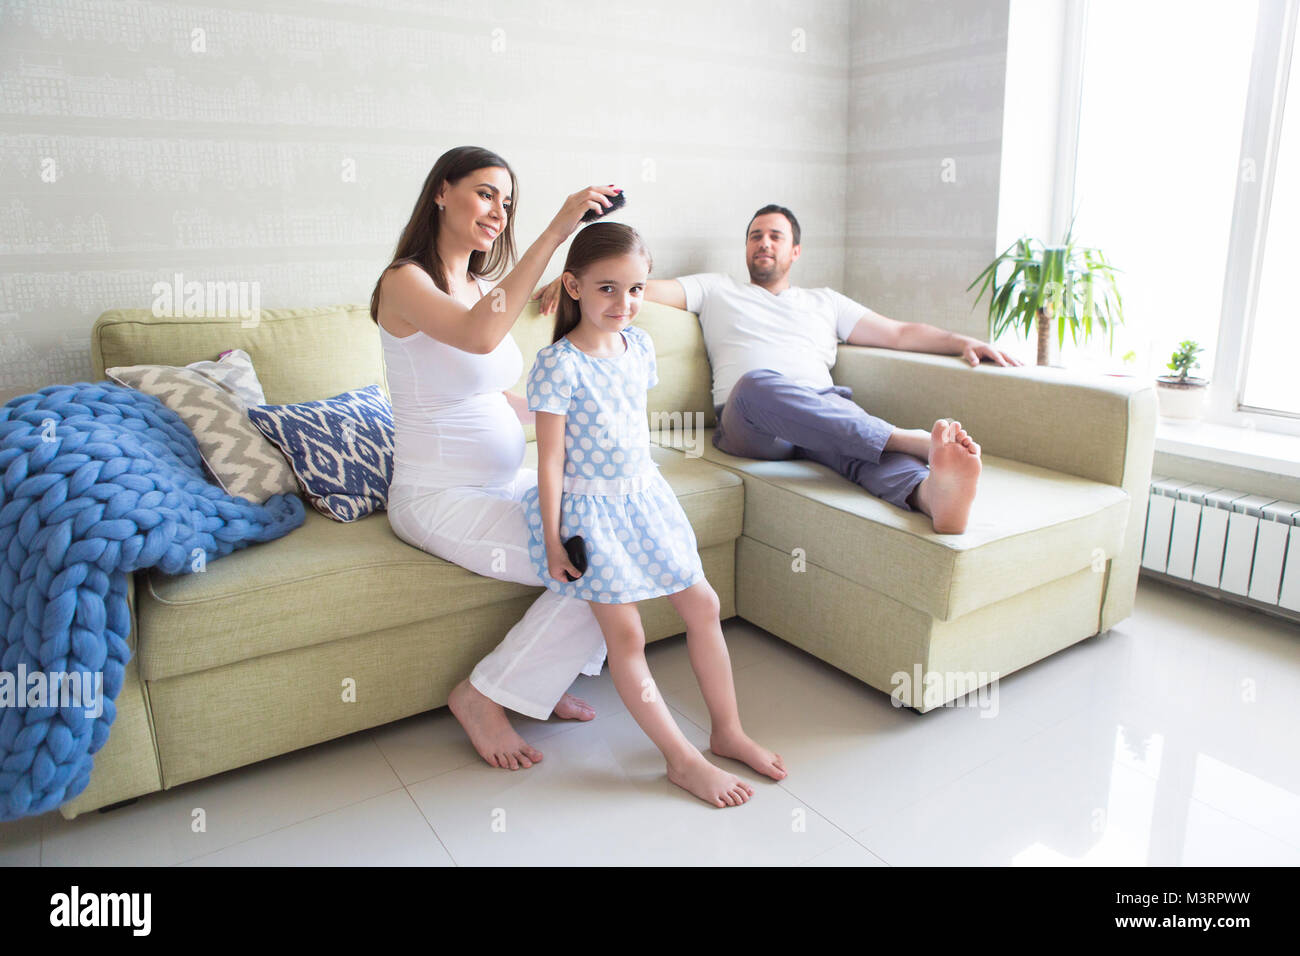 Adorable young pregnant family in living room. Mother combing her daughter's hair. Happiness and love concept Stock Photo